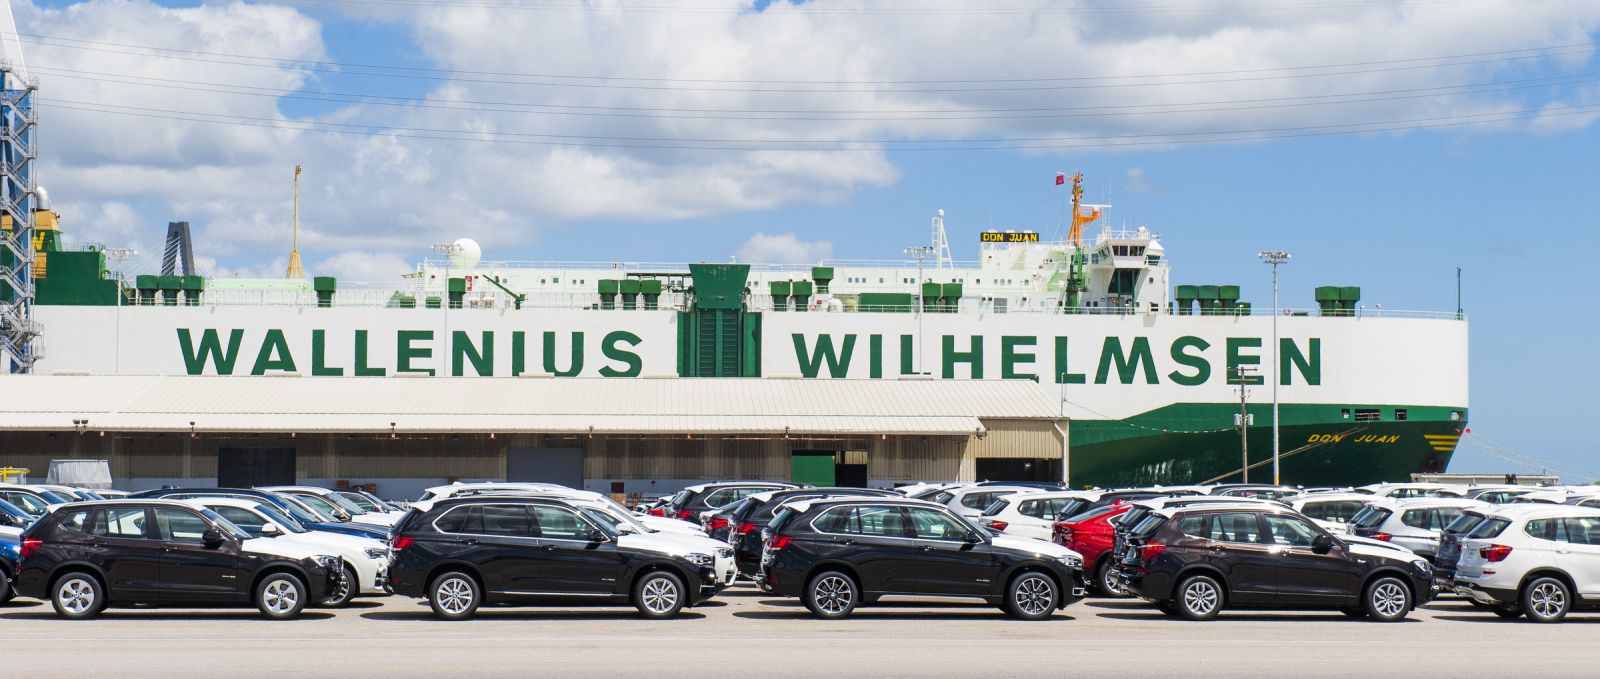 The S.C. Ports Authority said an increase in vehicles moved through the Columbus Street Terminal indicates a return to normalcy at automotive plants in South Carolina and across the Southeast. (Photo/file)